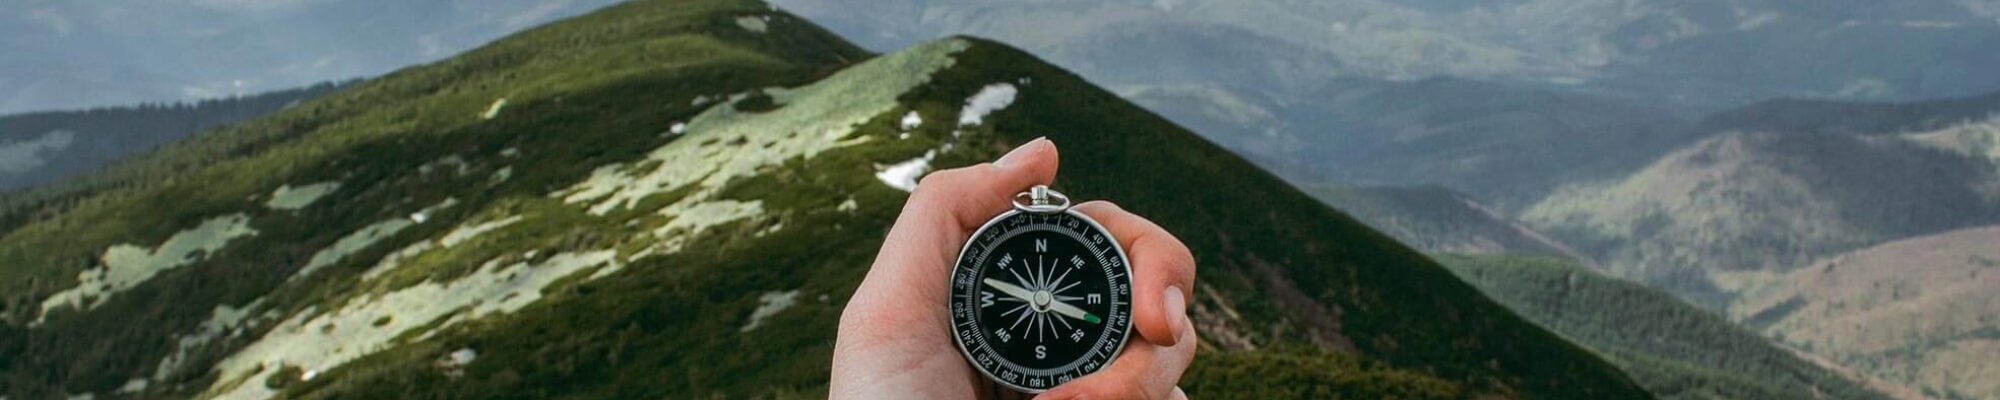 Compass in an outstretched hand